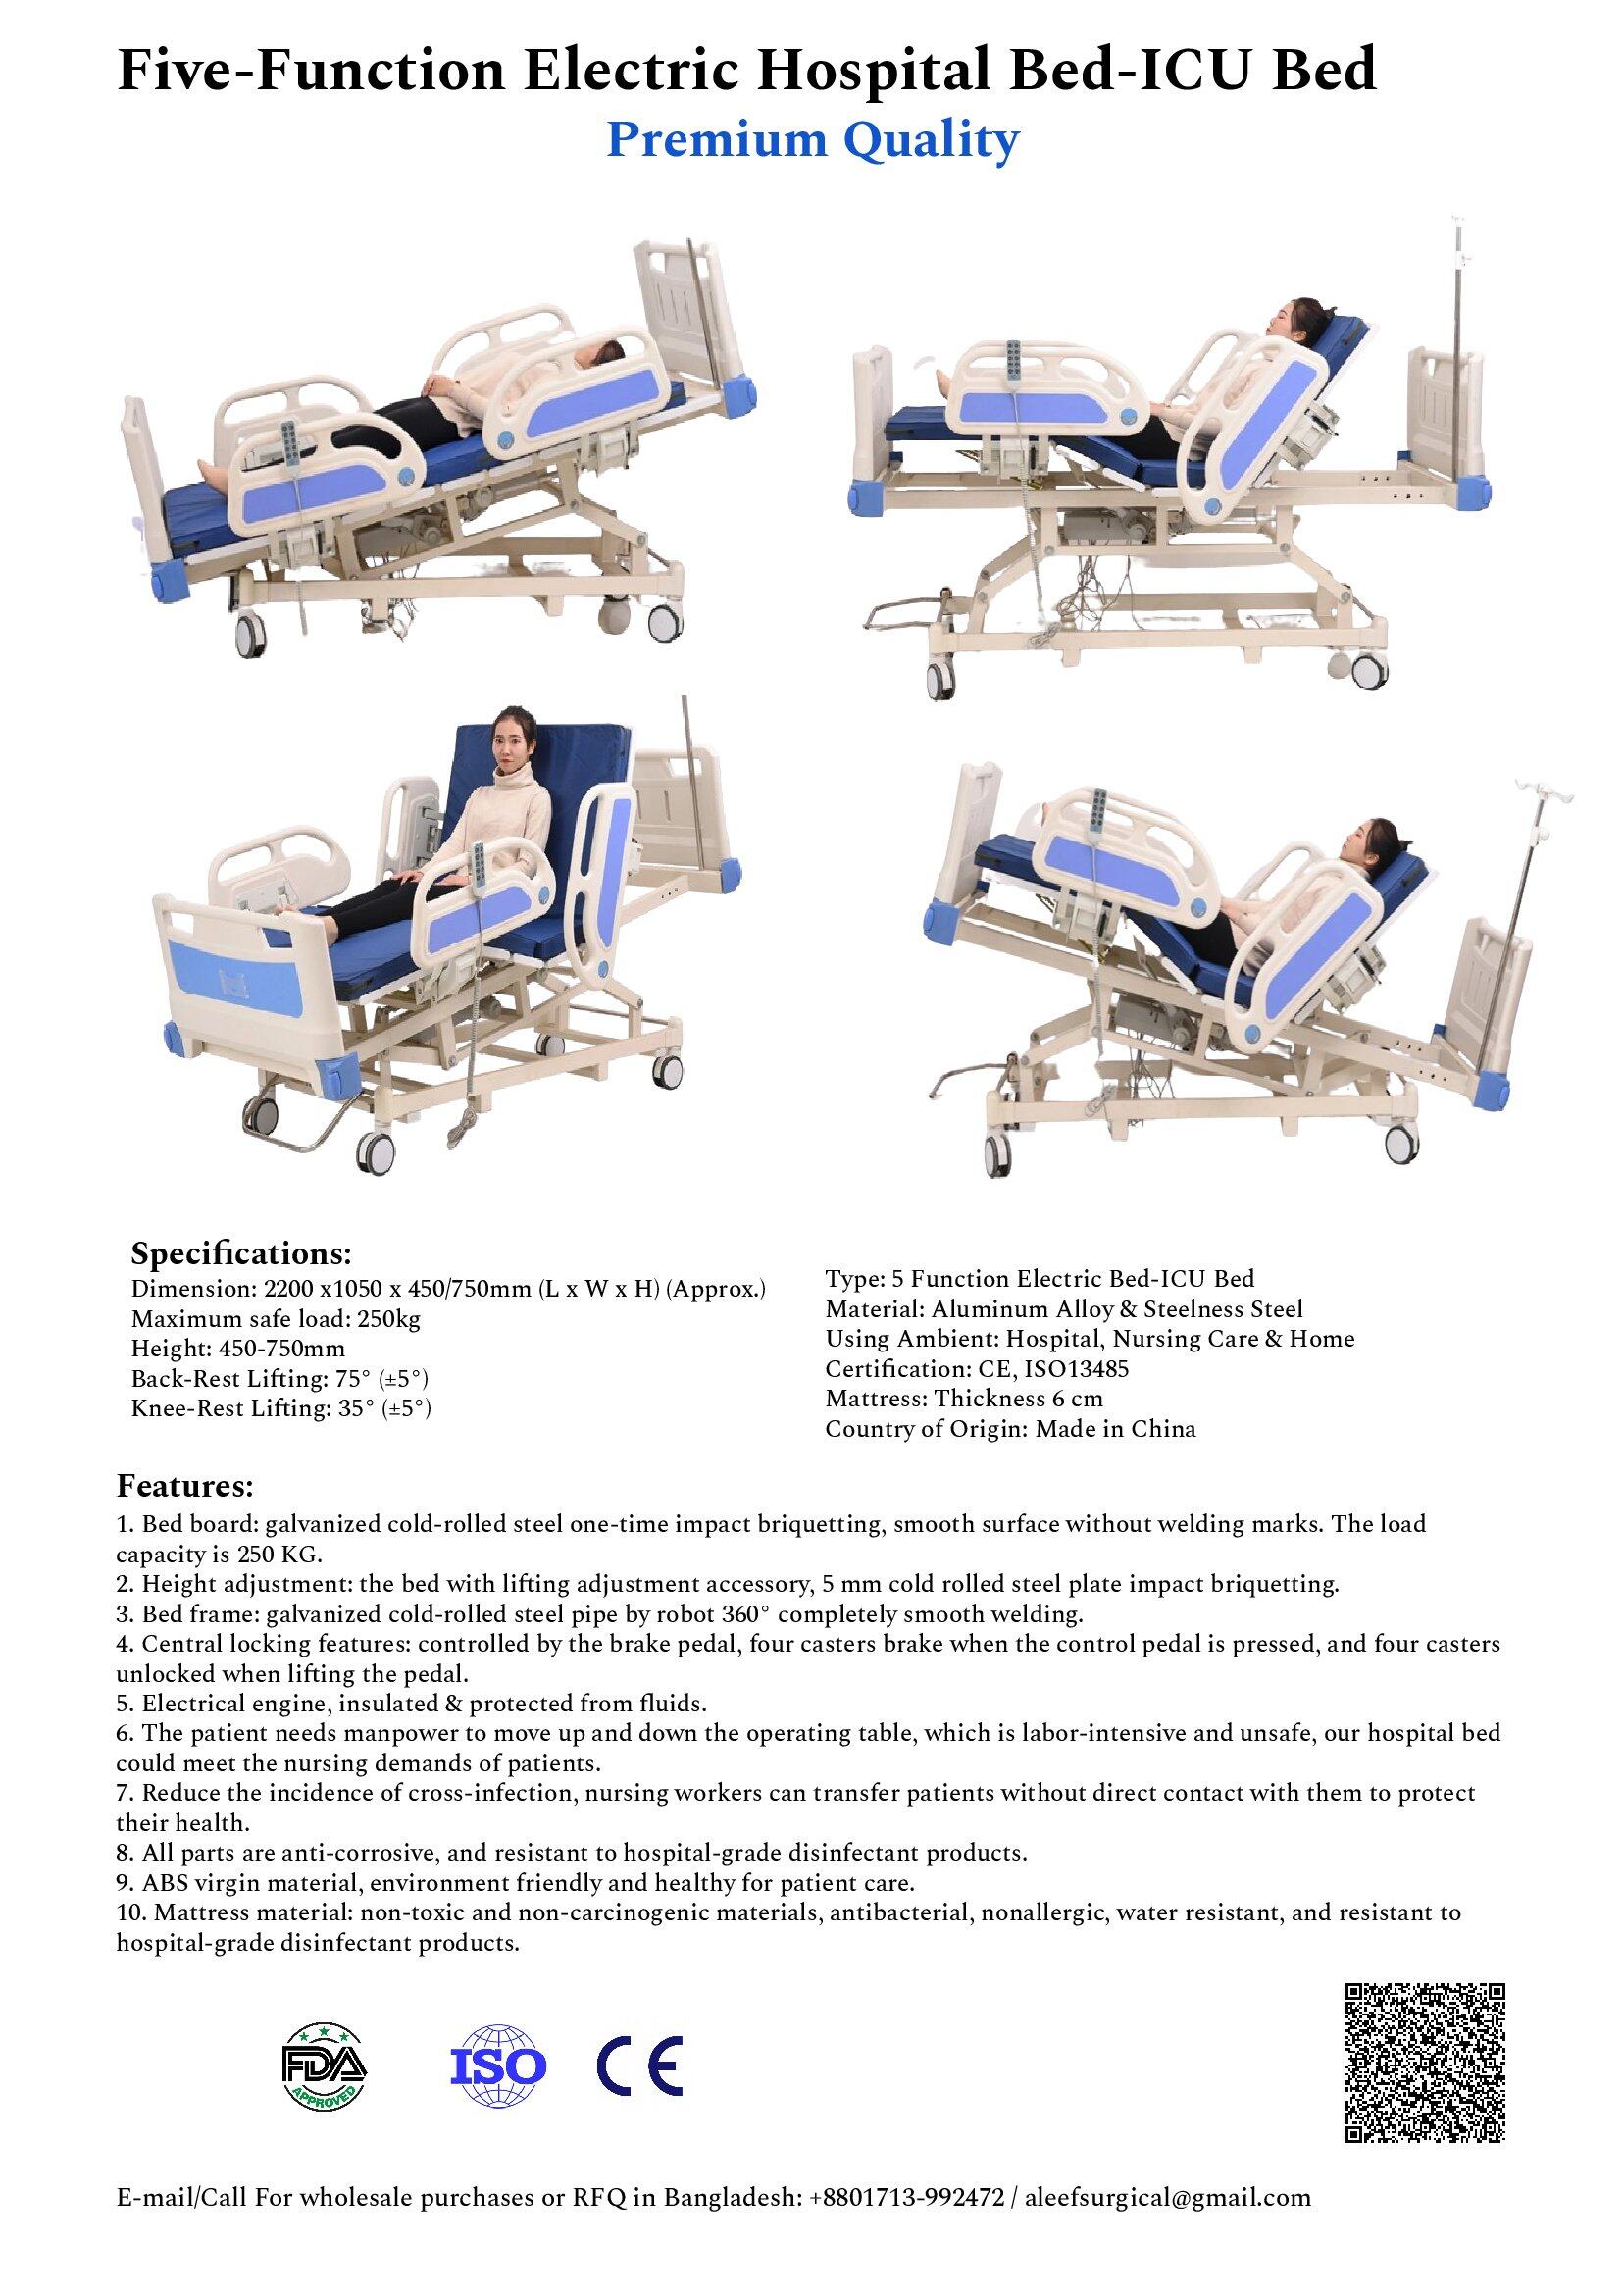 Five-Function Electric Hospital Bed-ICU Bed Premium Quality. Image